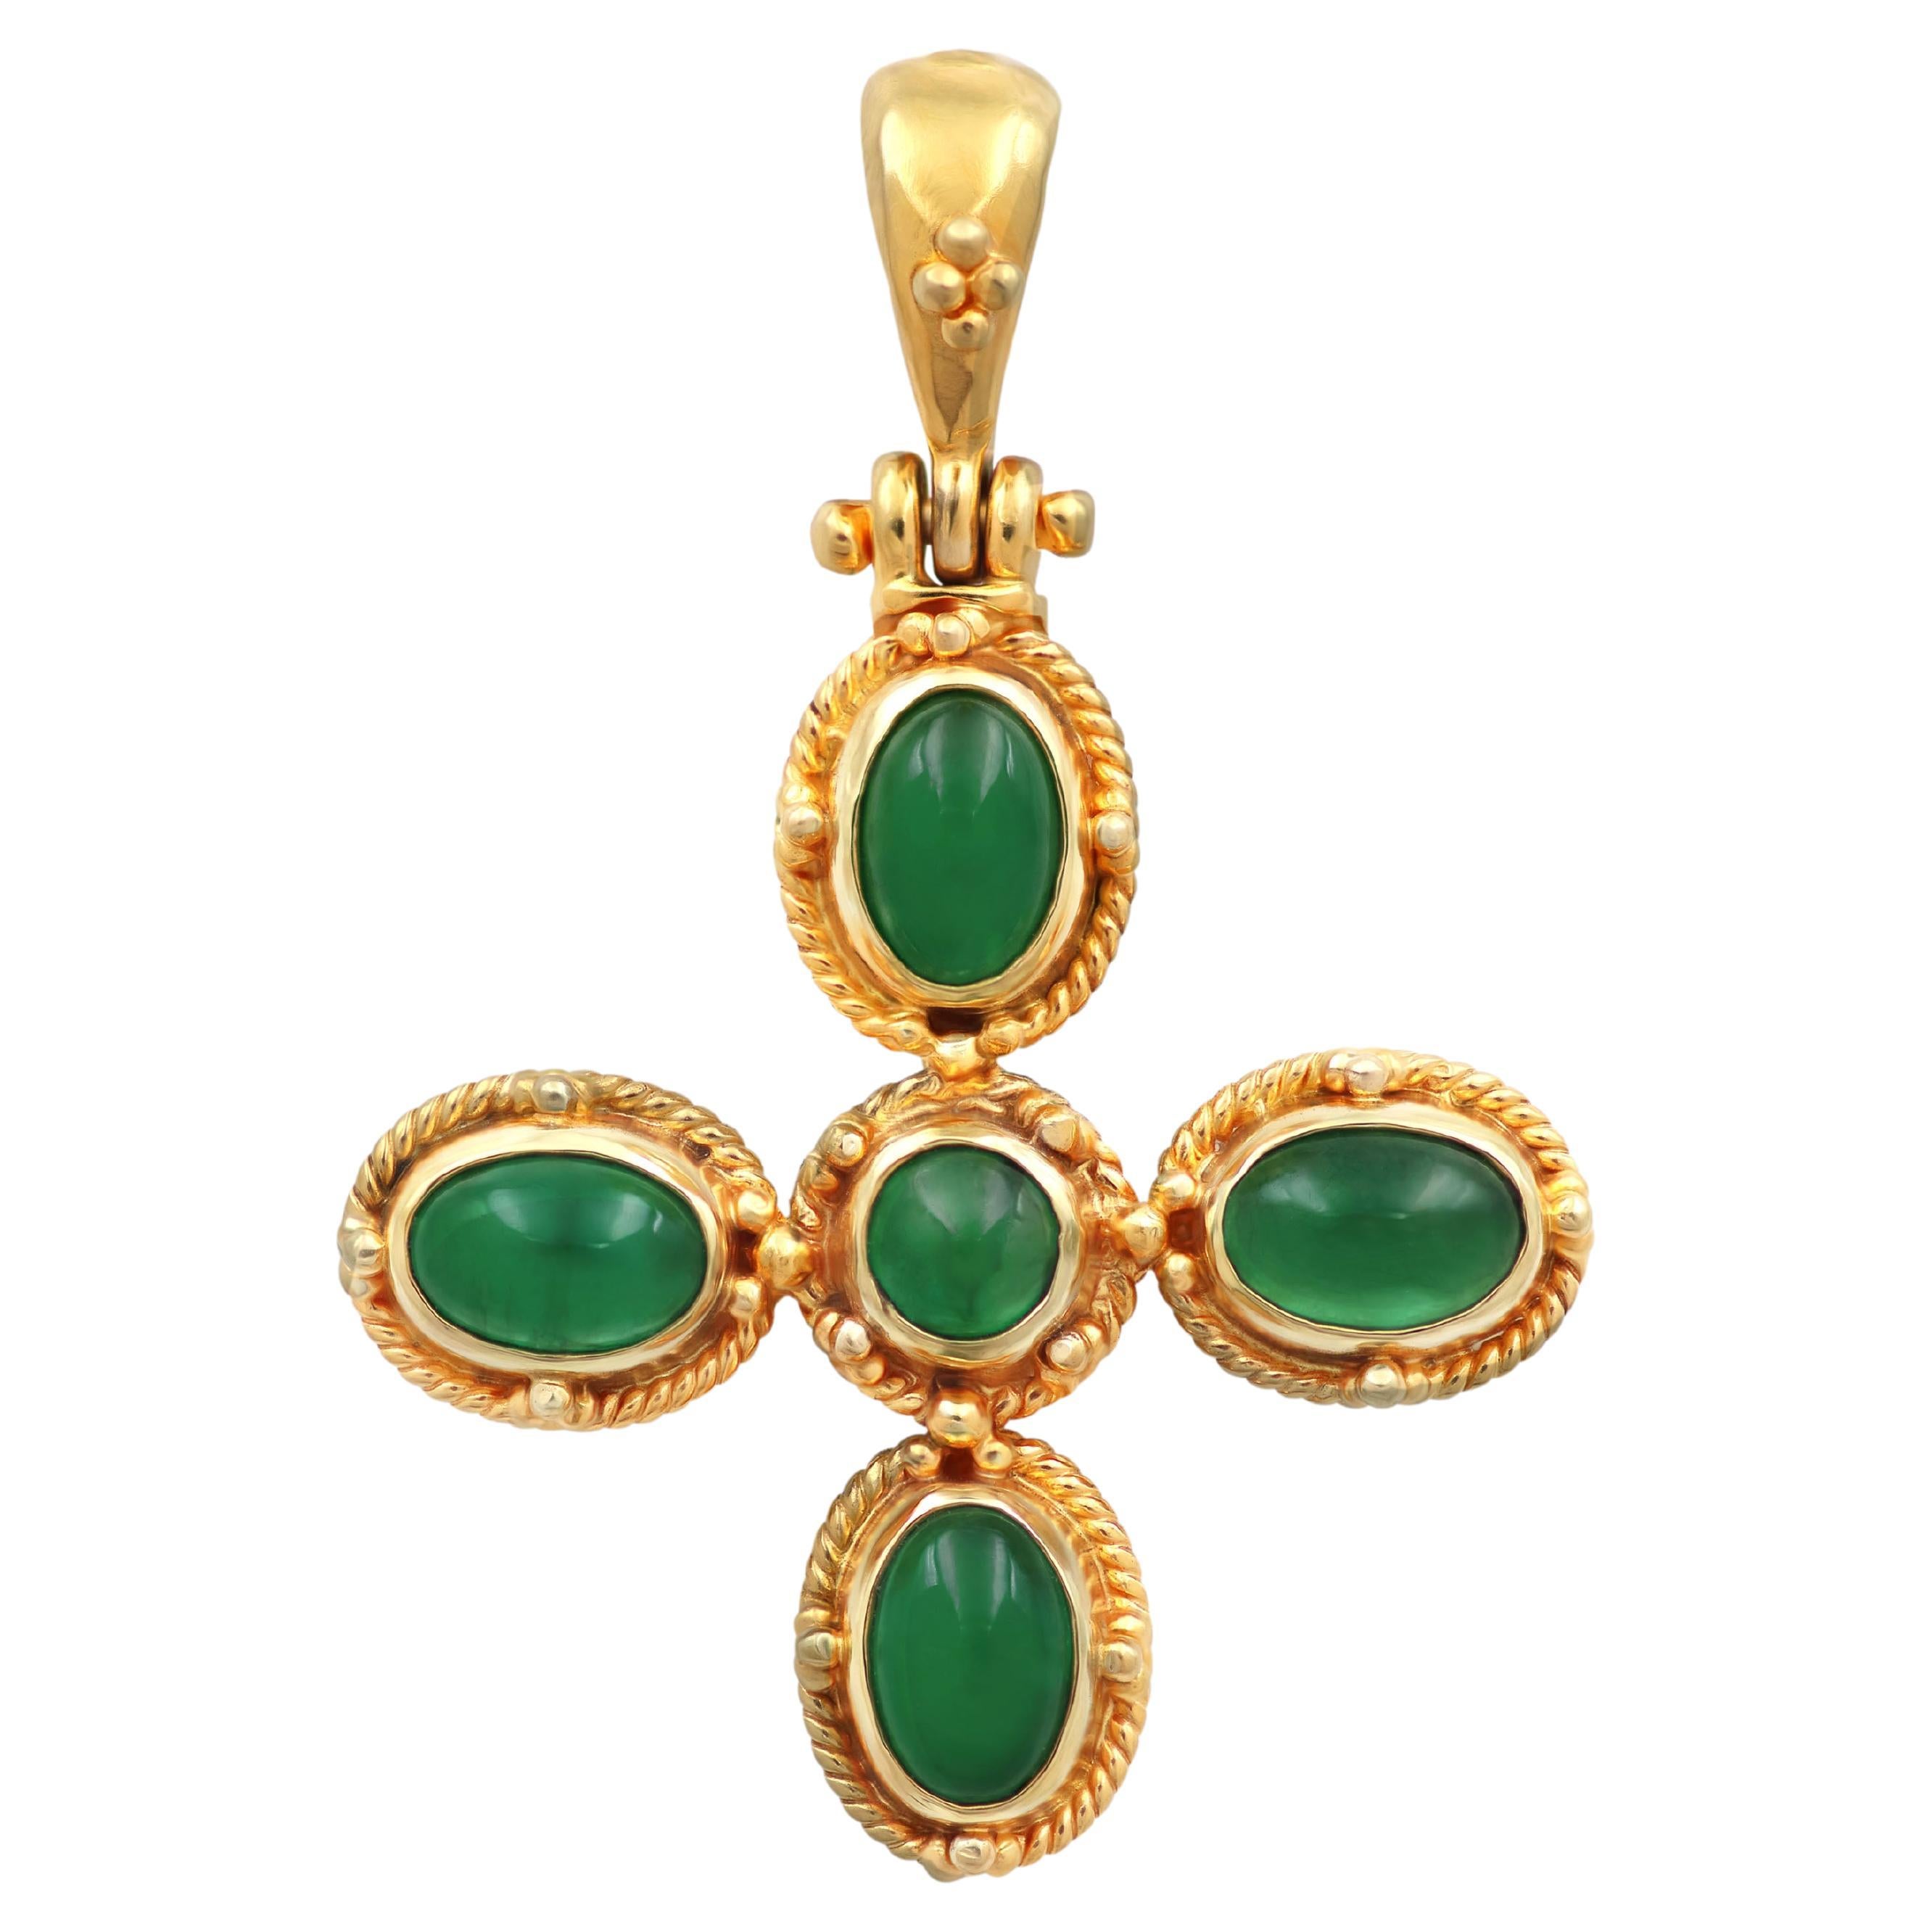 Dimos 18k Gold Byzantine Inspired Cross with Emeralds